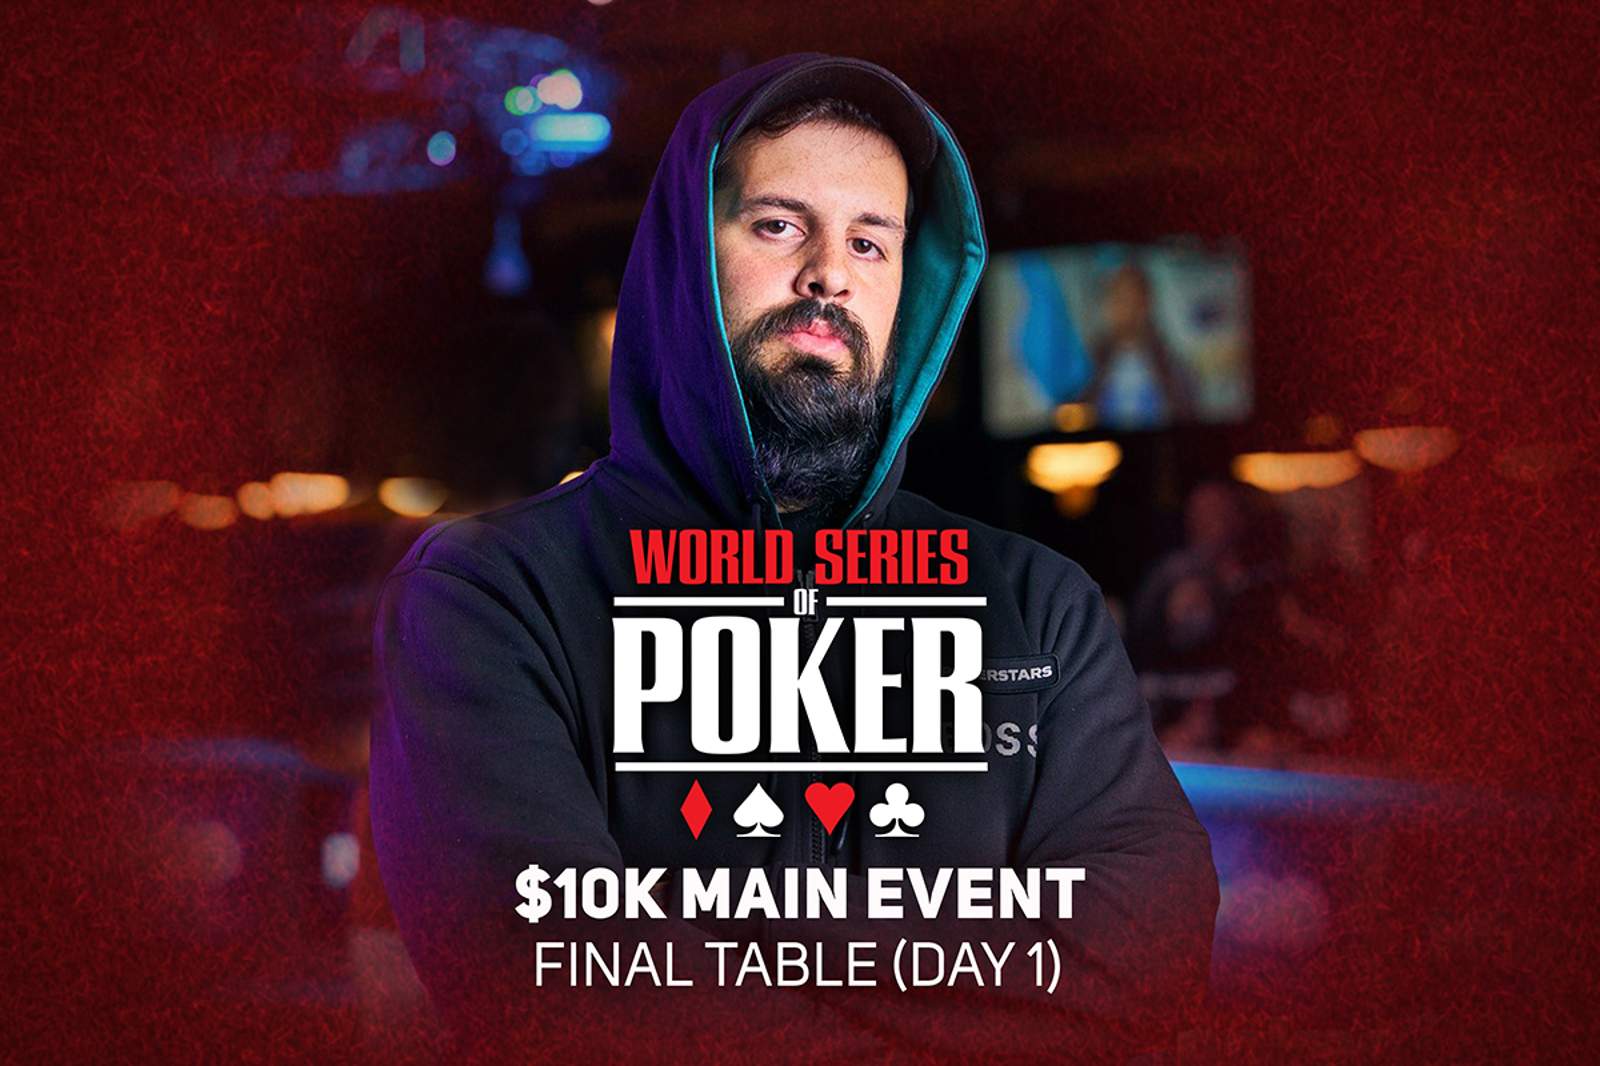 Watch the 2021 WSOP Main Event Final Table (Day 1) on PokerGO.com at 8 p.m. ET